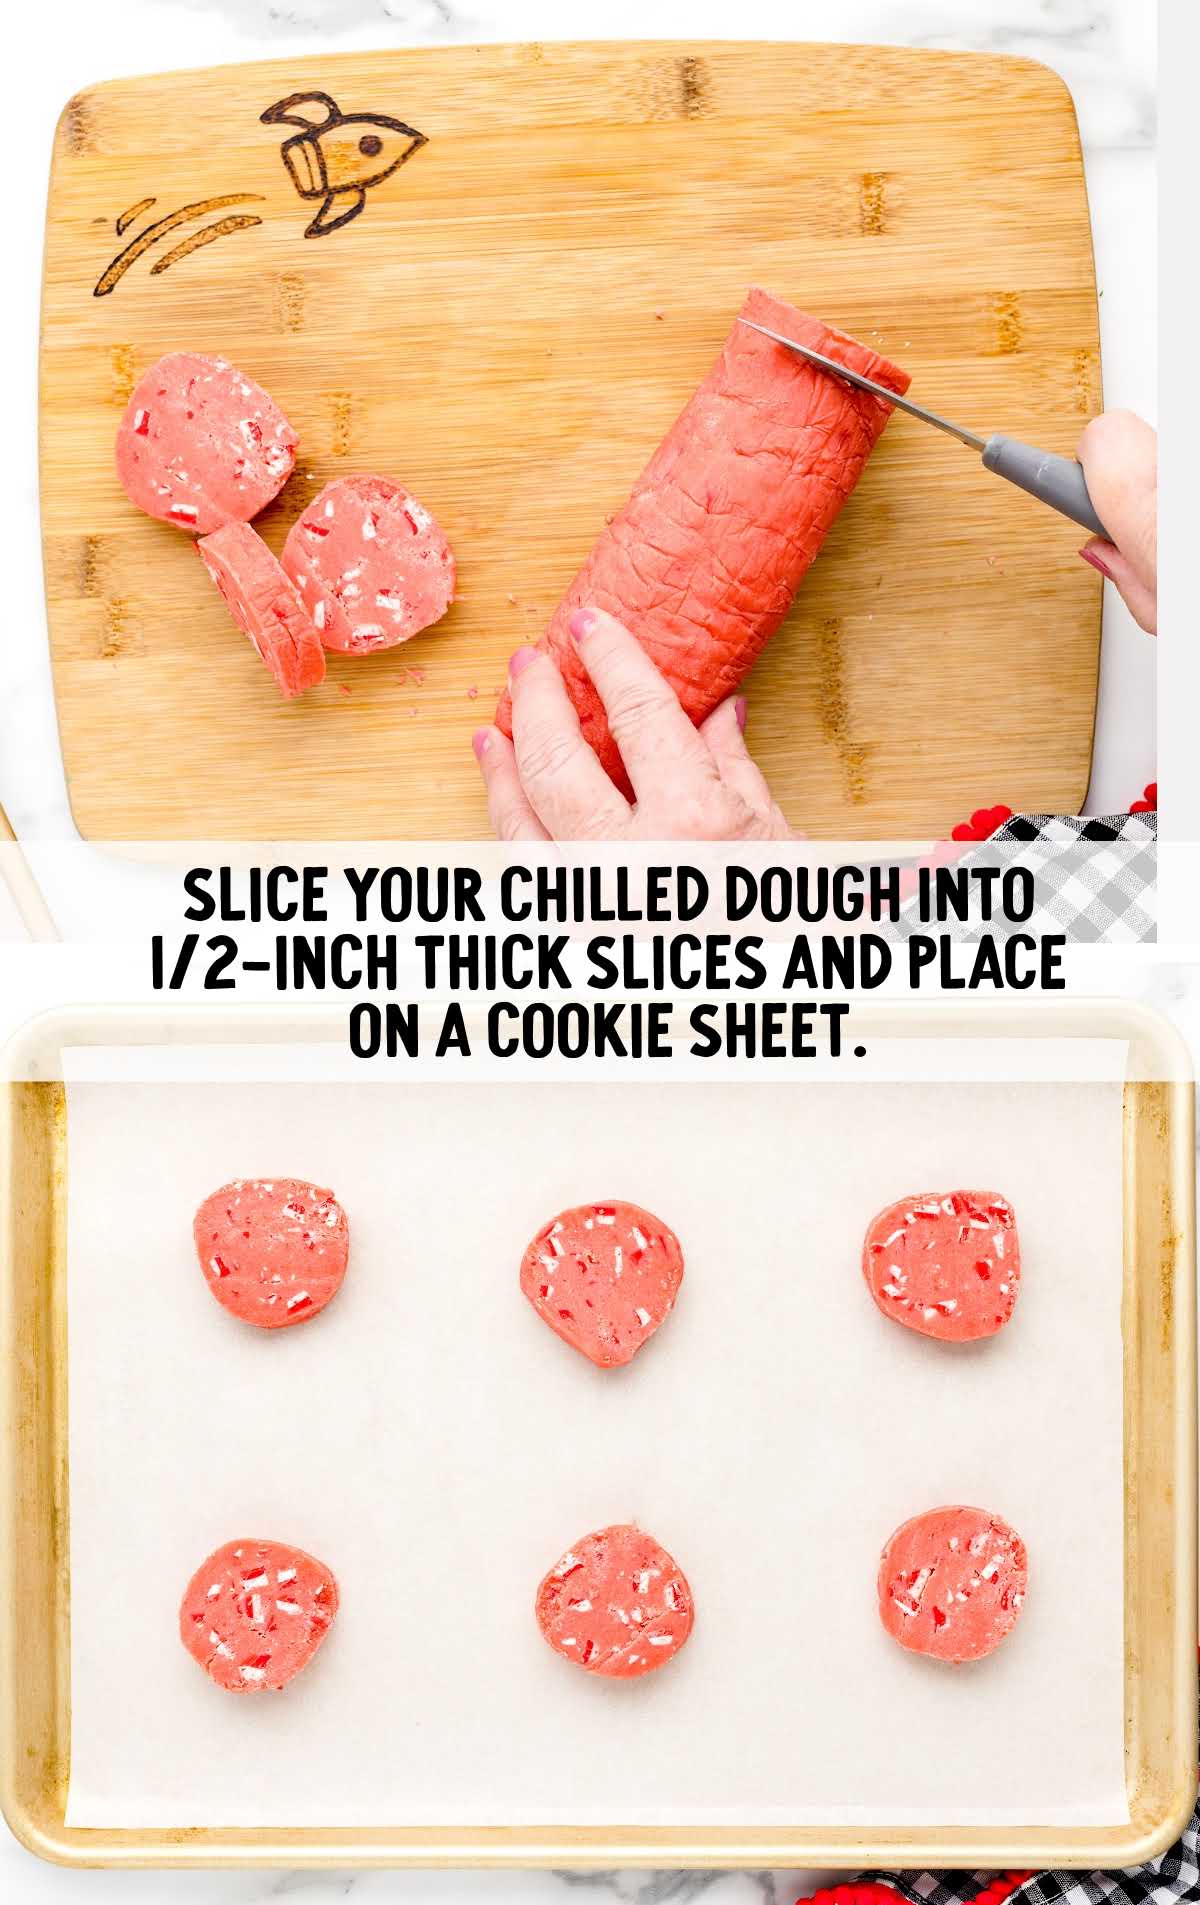 using a knife slice chilled dough and place on cookie sheet